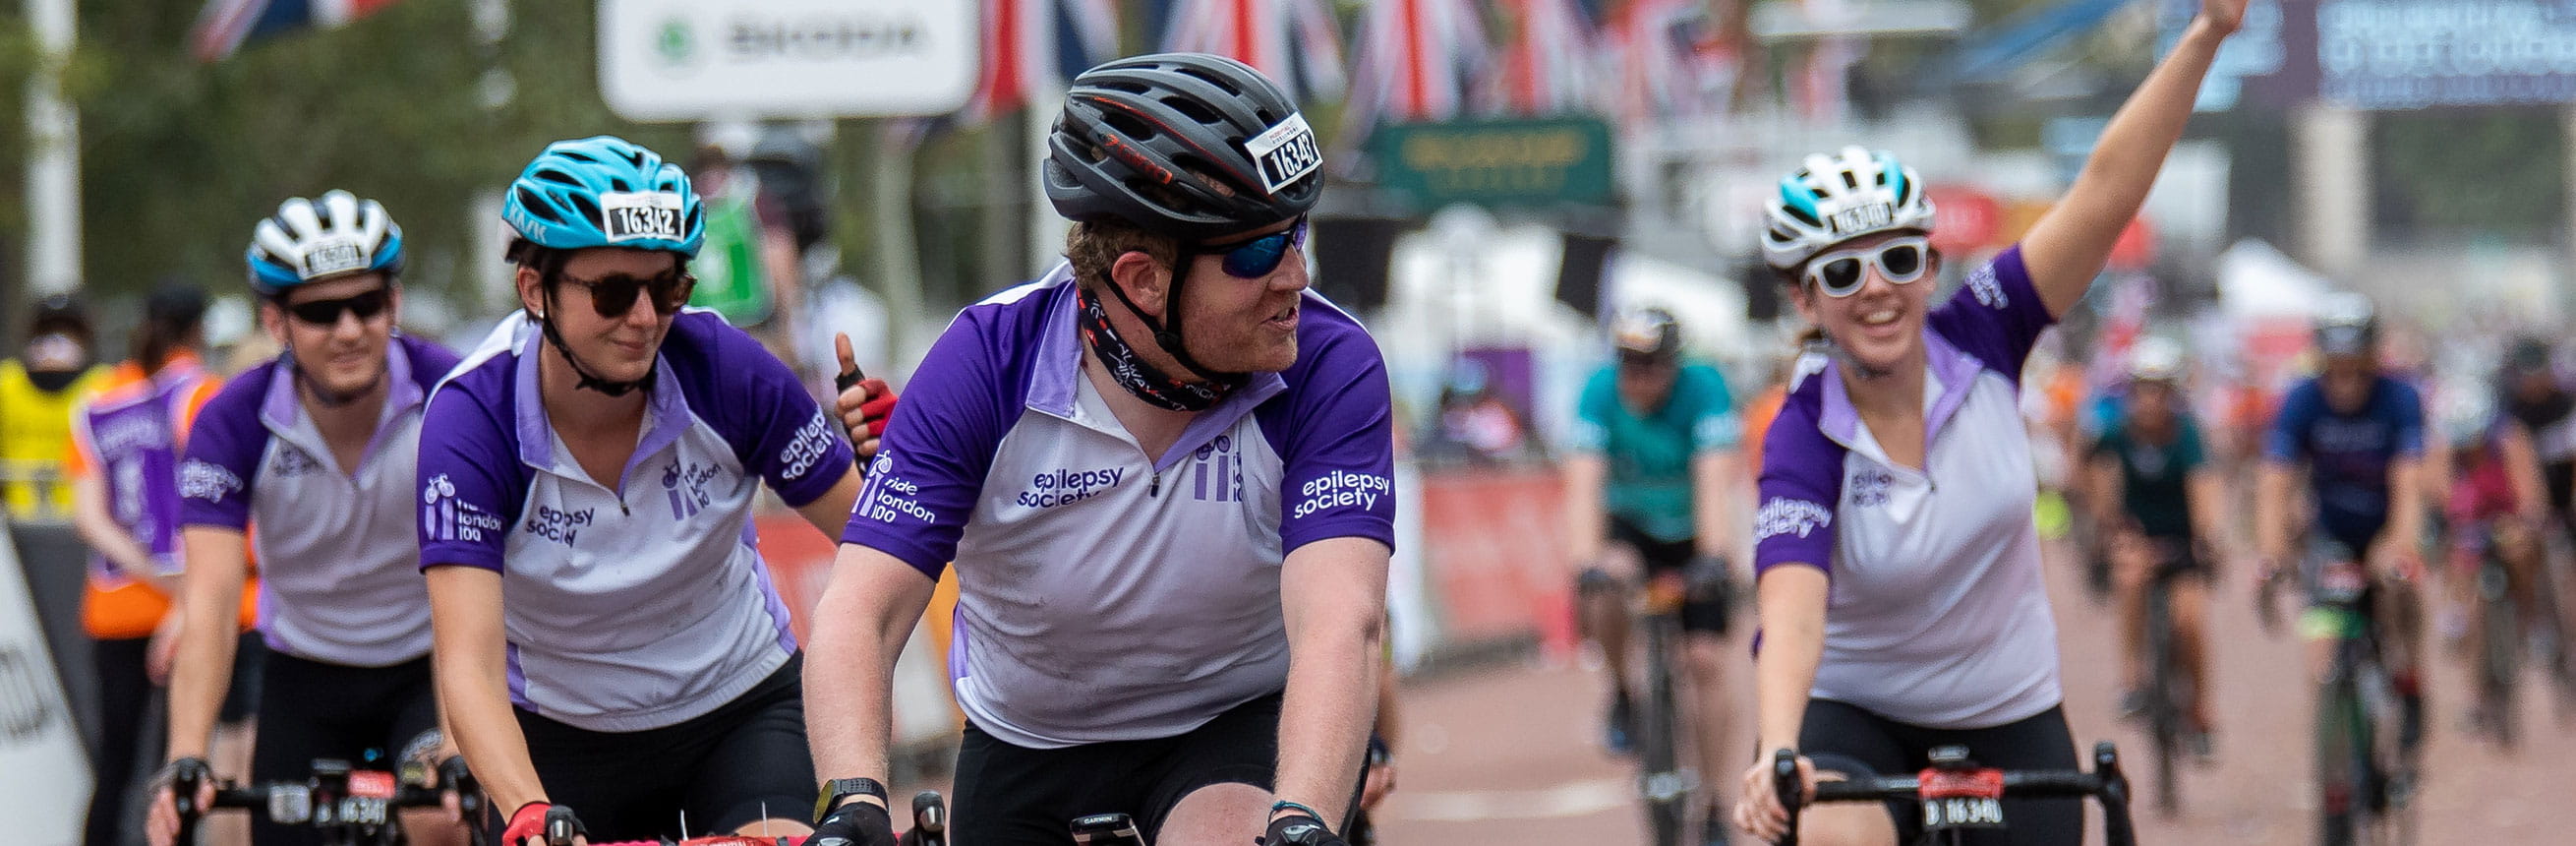 Finishers on during The RideLondon Sportives. Sunday 4th August 2019